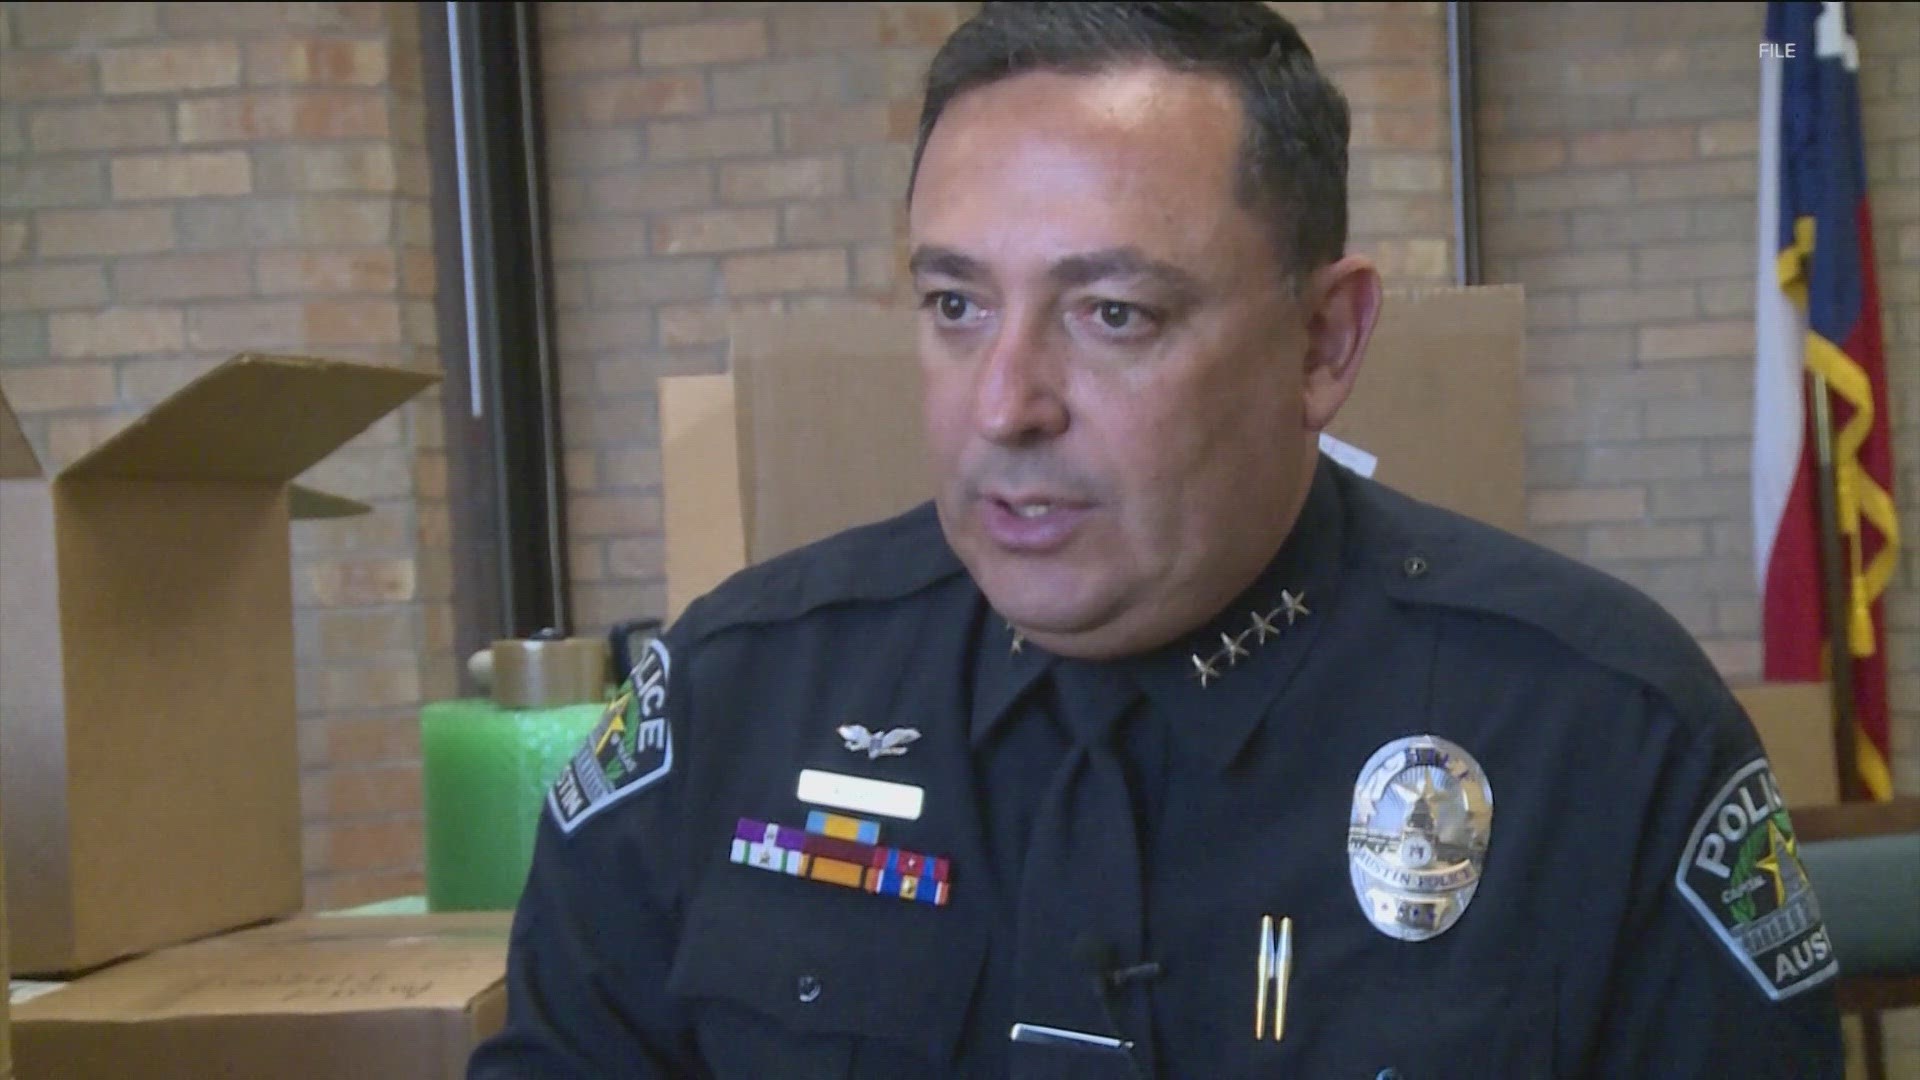 Former Austin Police Chief Art Acevedo will no longer rejoin the City of Austin as an executive. It follows a firestorm over his new position.